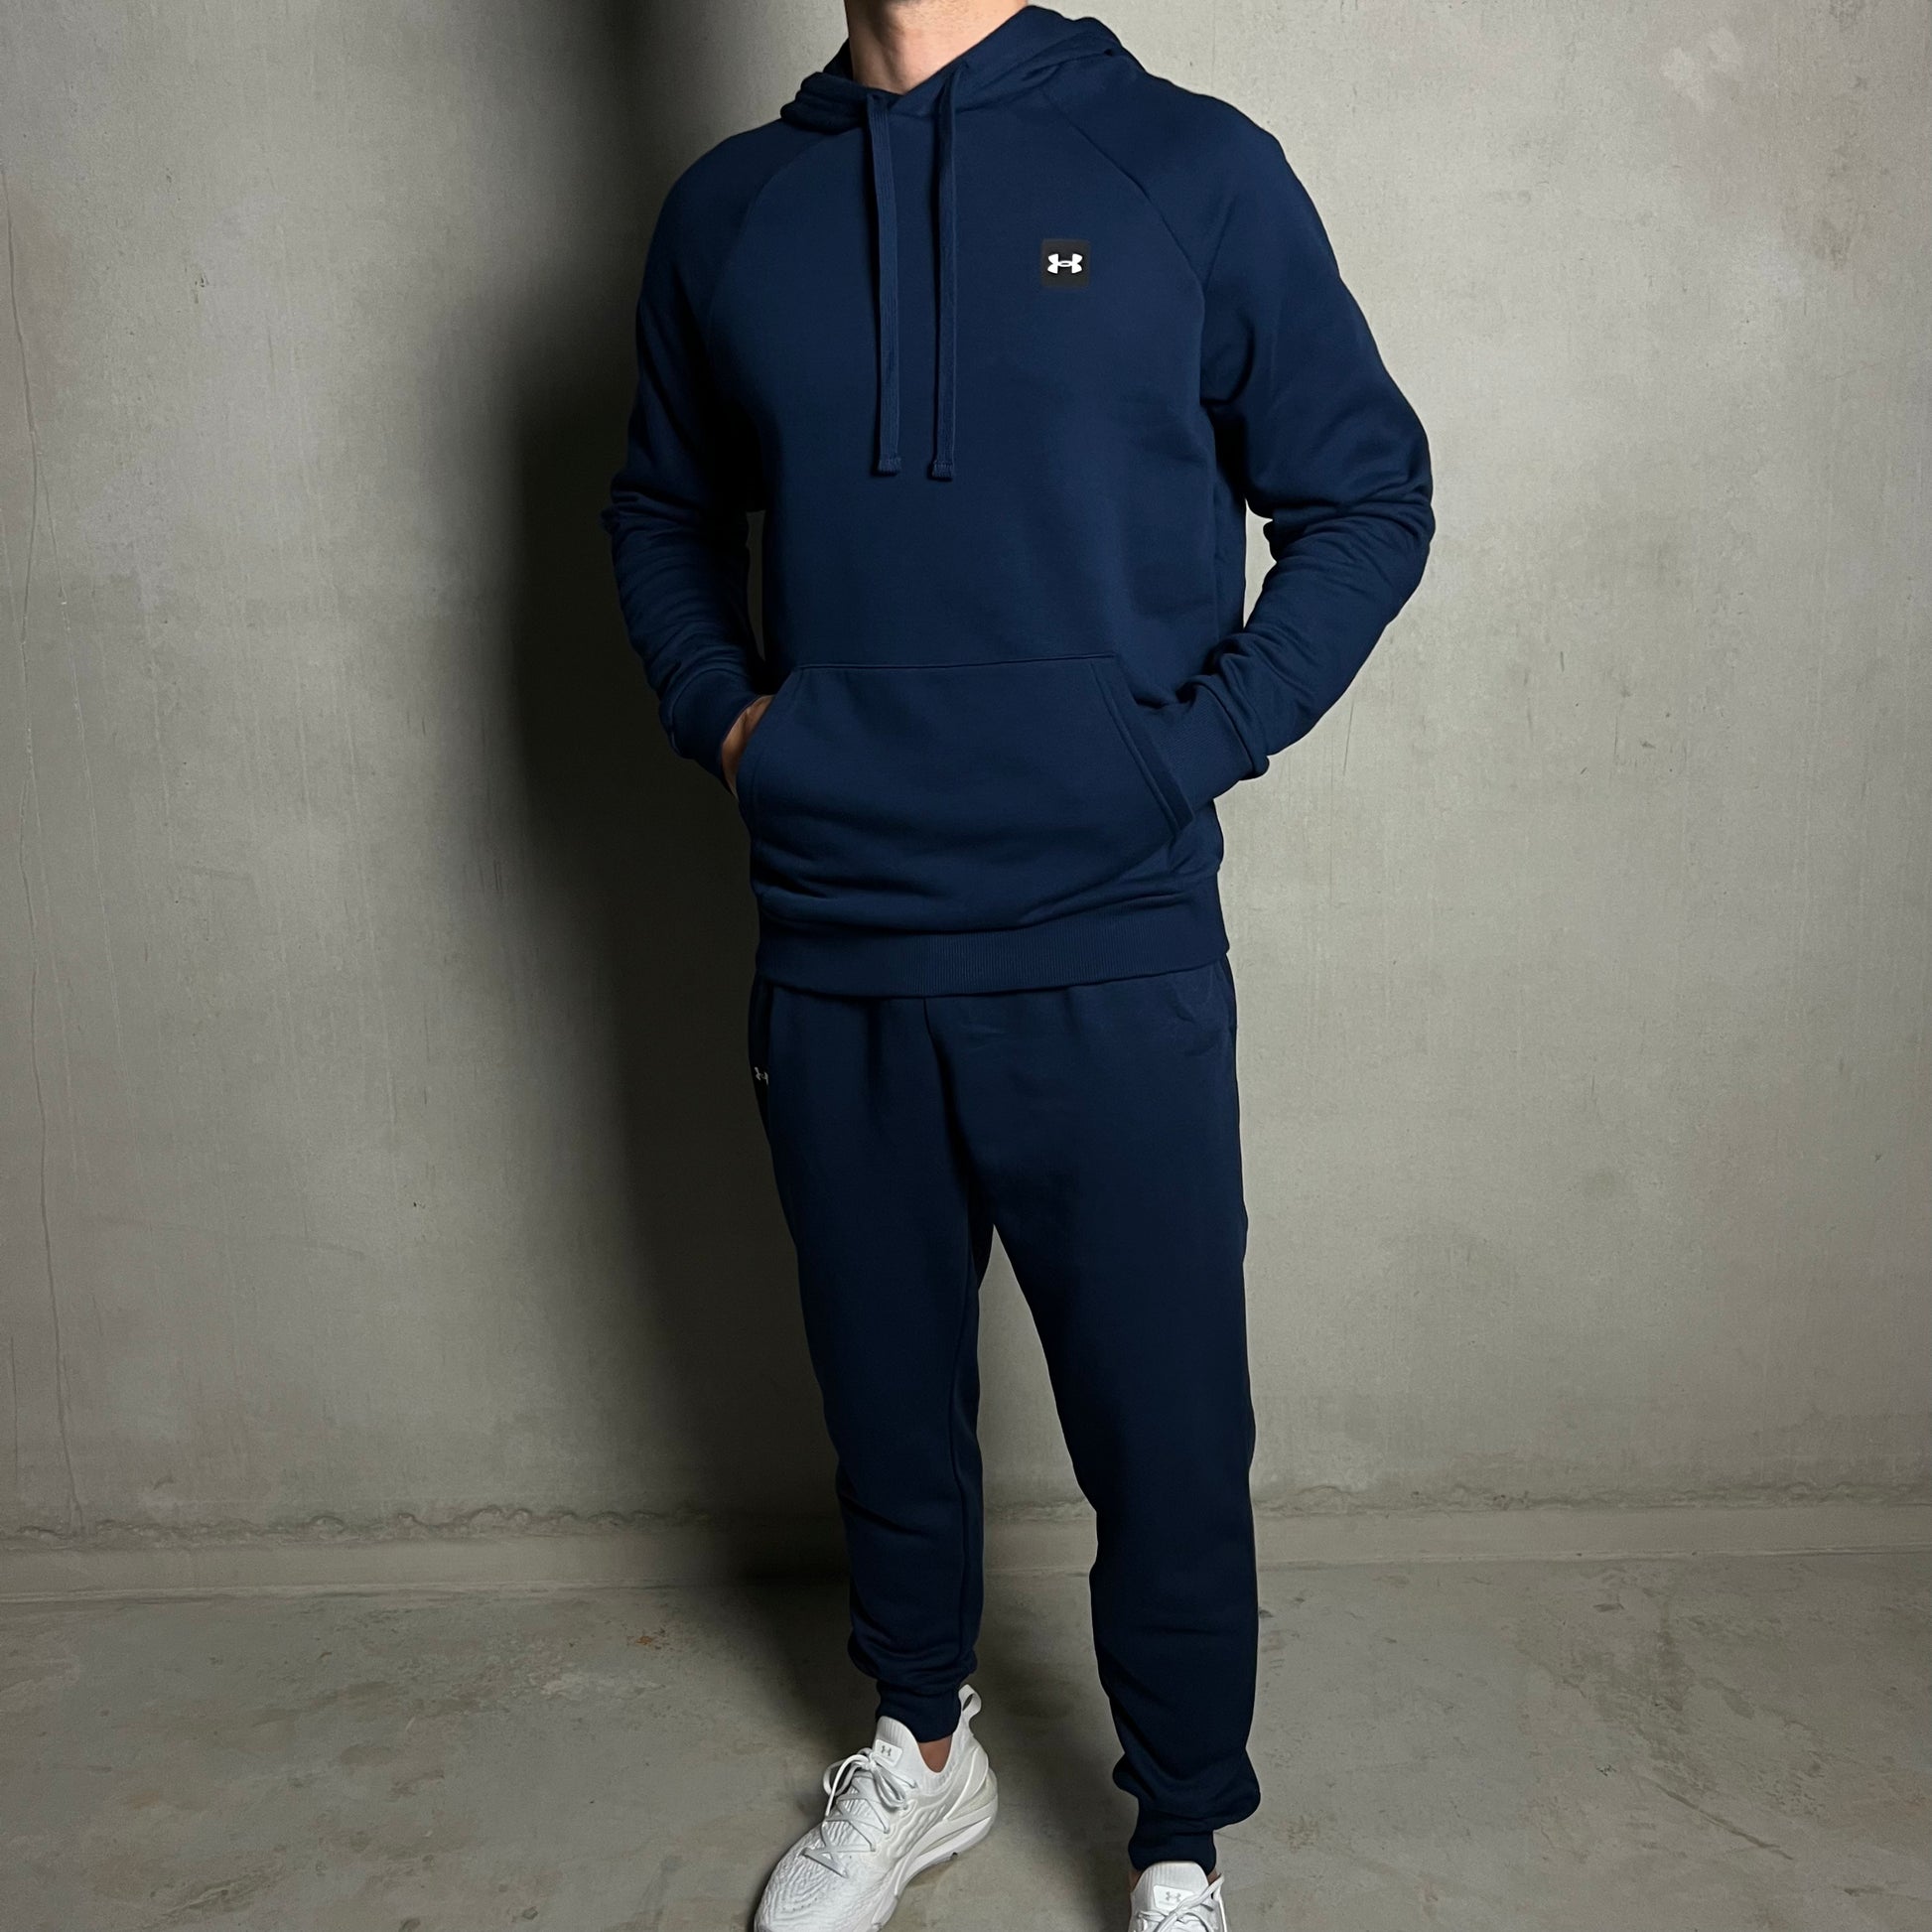 Under Armour Fleece Hoodie 24motions Tracksuit – Blue